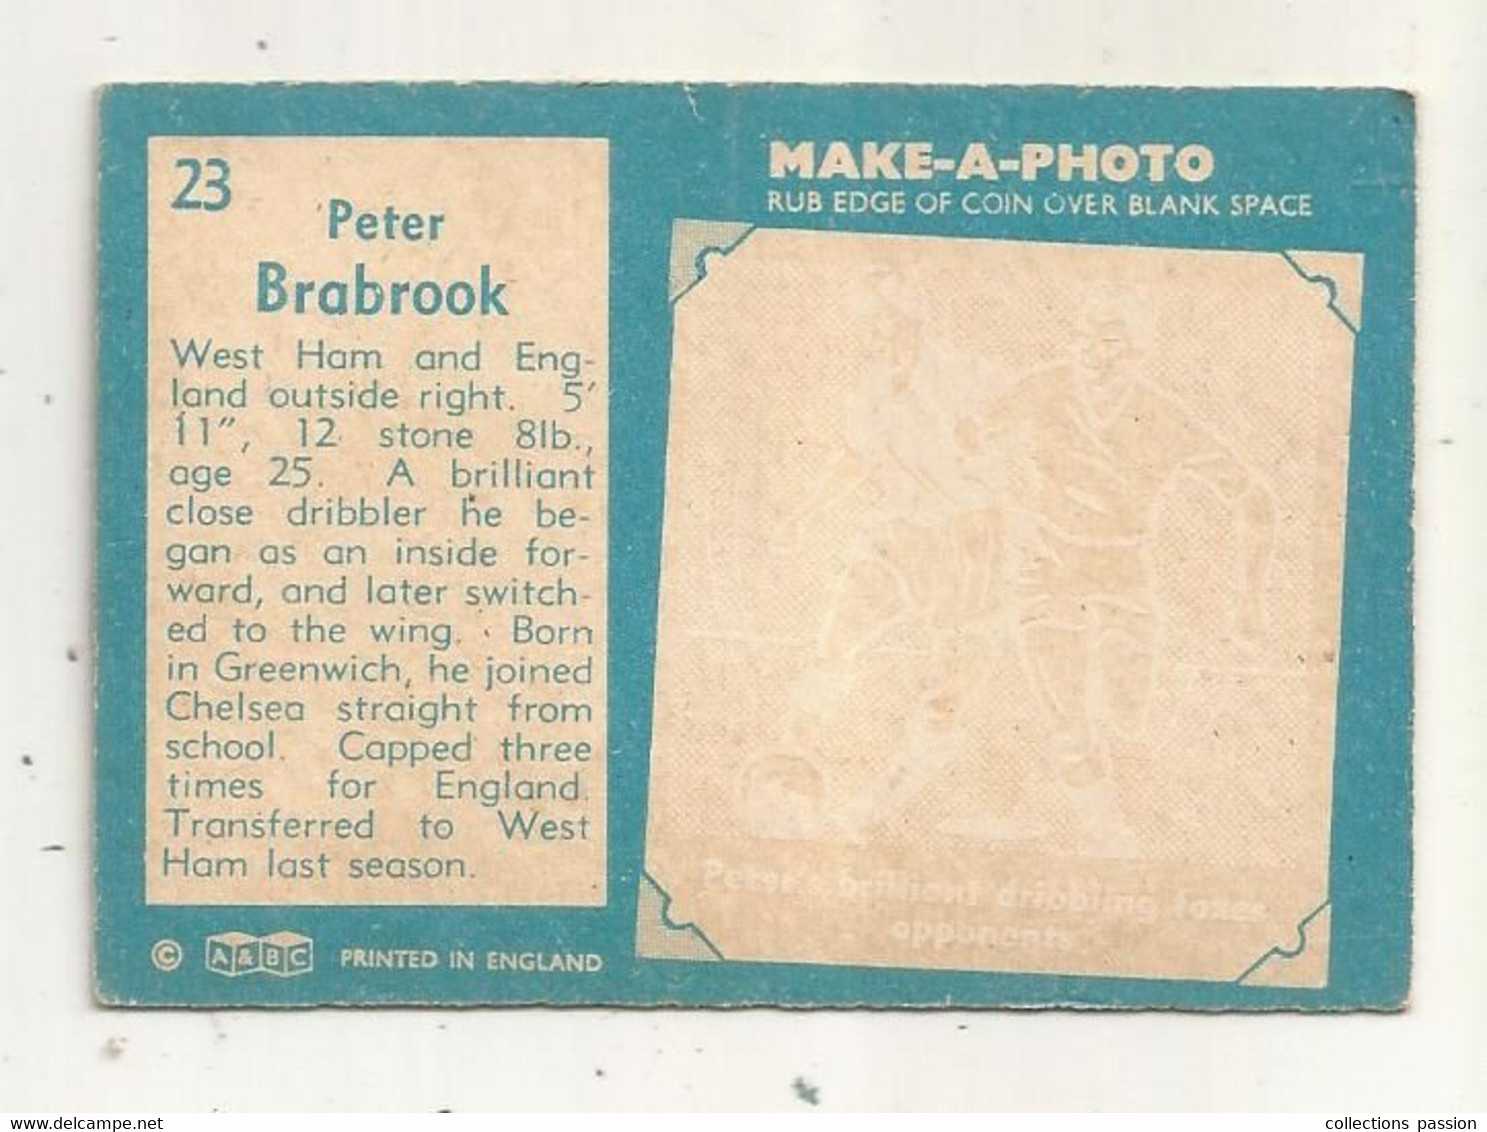 Trading Card , A&BC , England, Chewing Gum, Serie : Make A Photo , Année 60 , N° 23 , PETER BRABROOK , West Ham - Trading-Karten